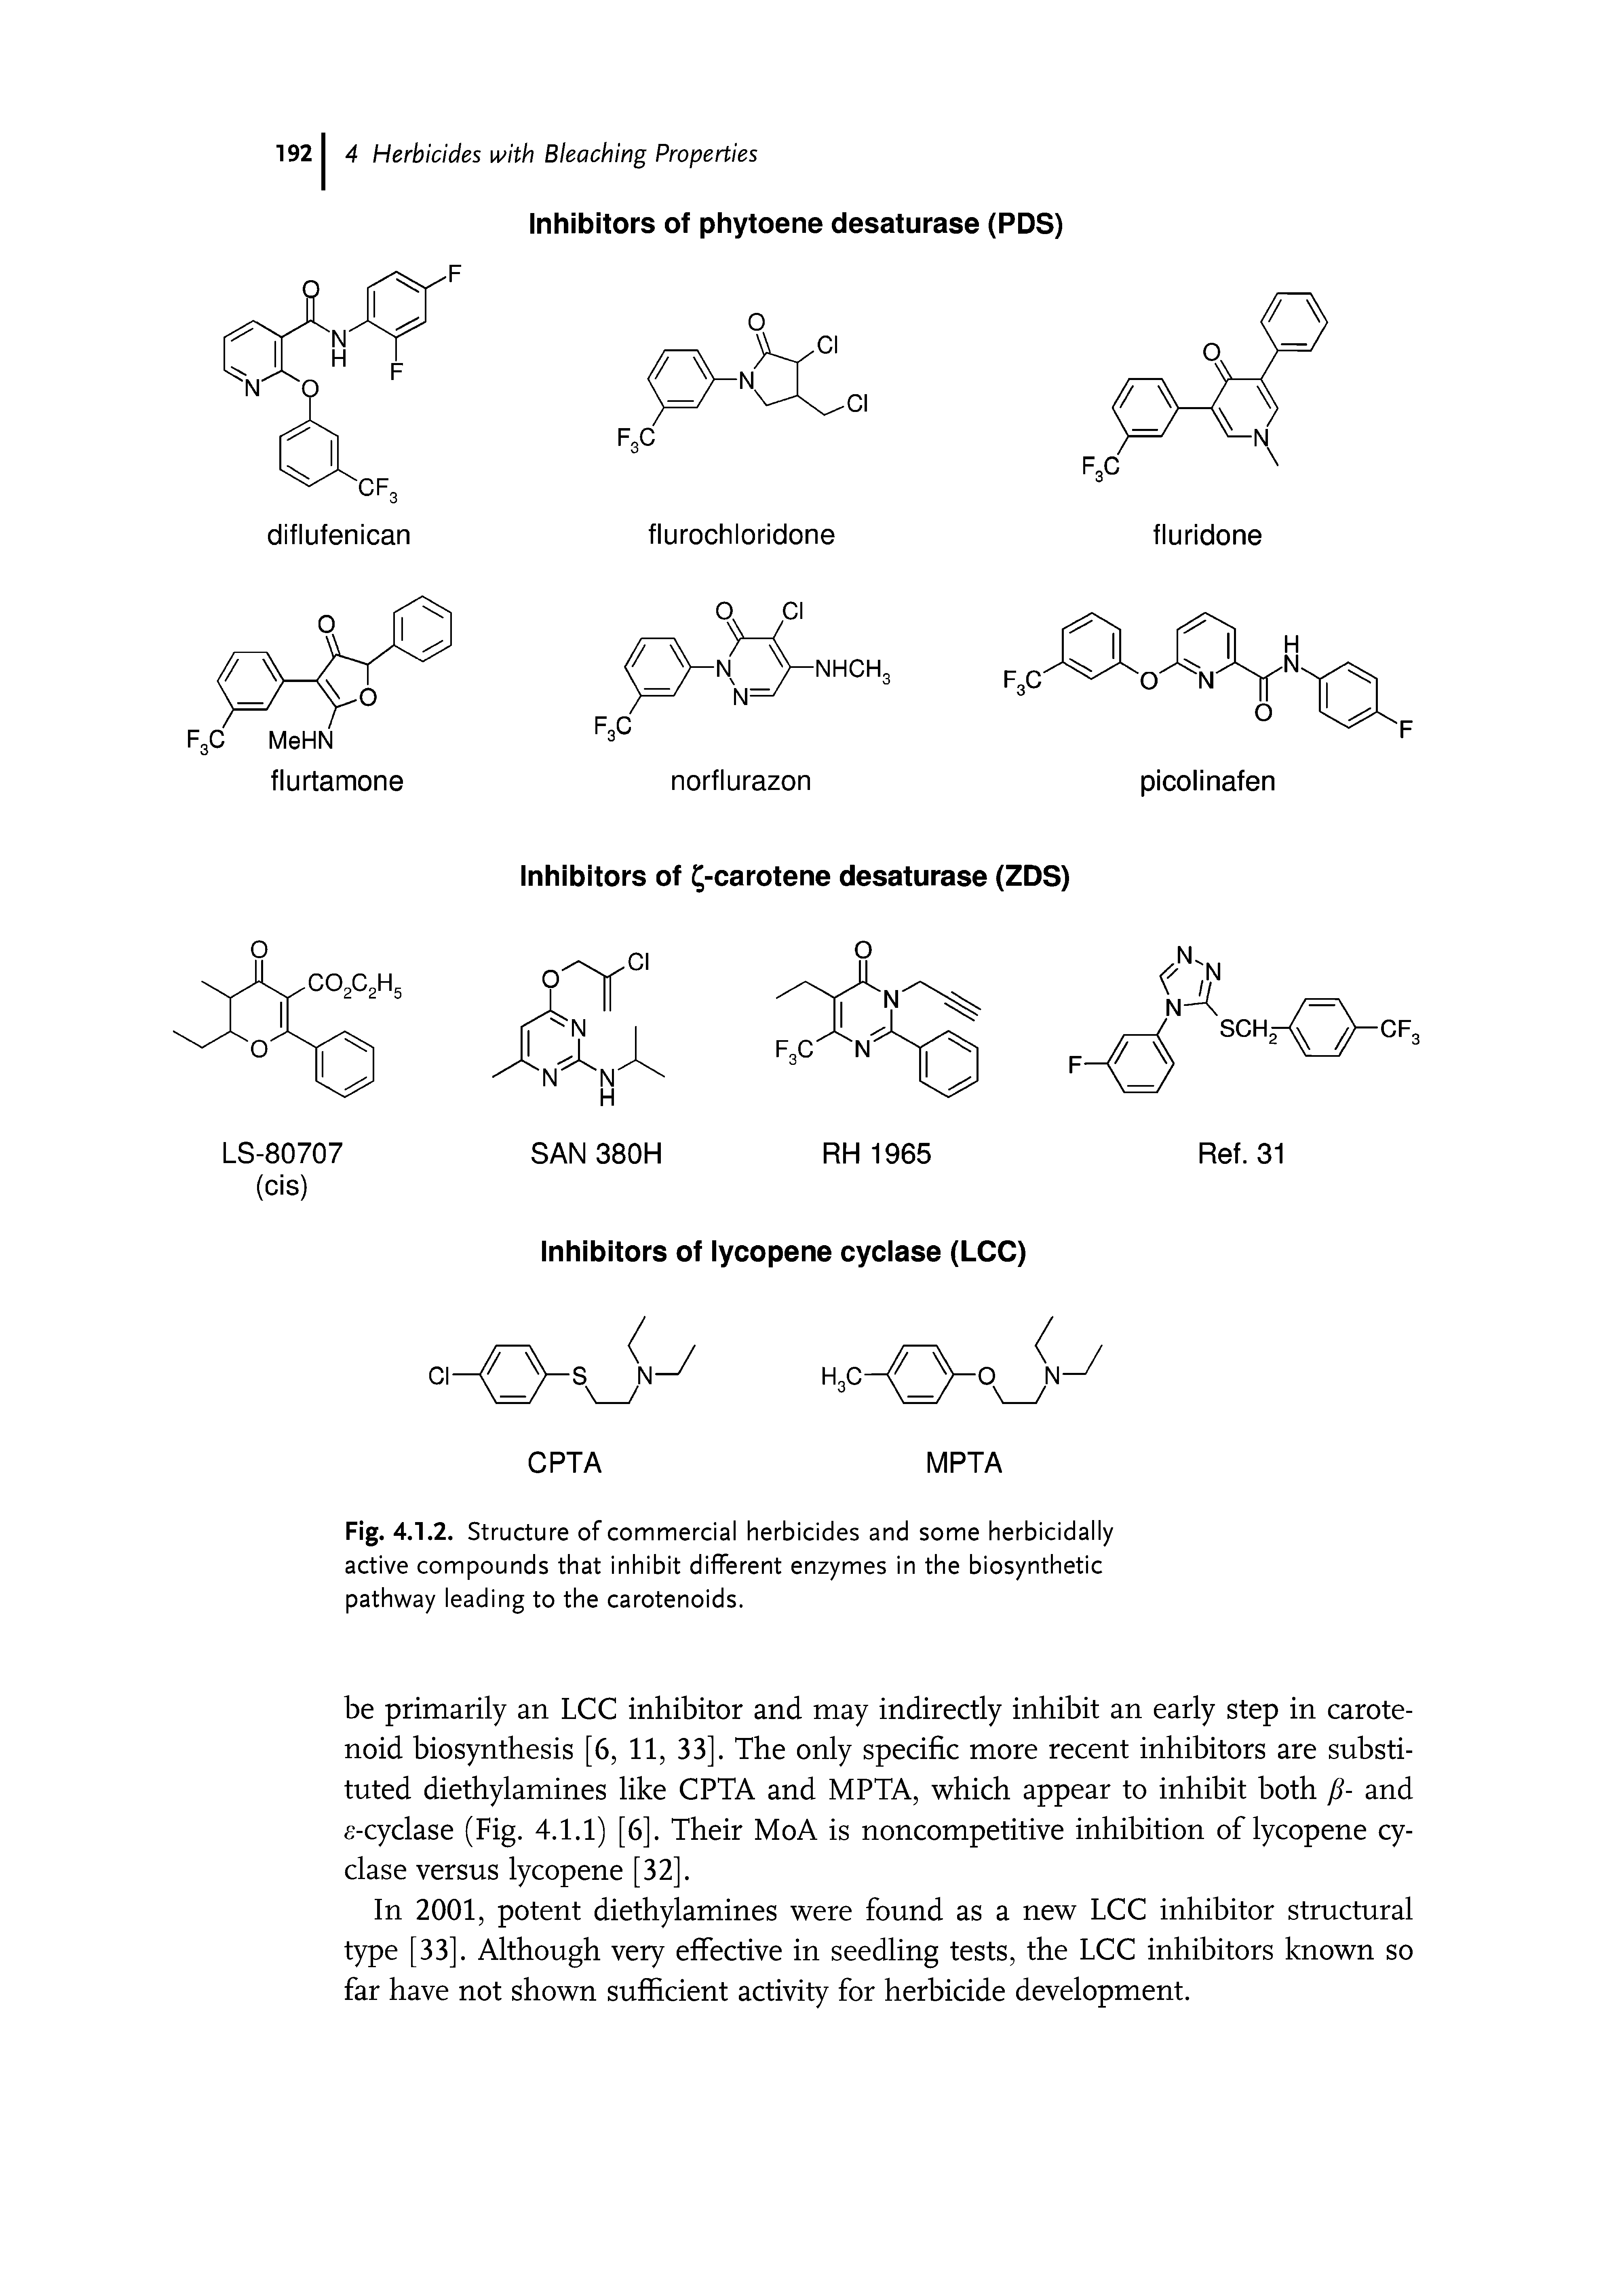 Fig. 4.1.2. Structure of commercial herbicides and some herbicidally active compounds that inhibit different enzymes in the biosynthetic pathway leading to the carotenoids.